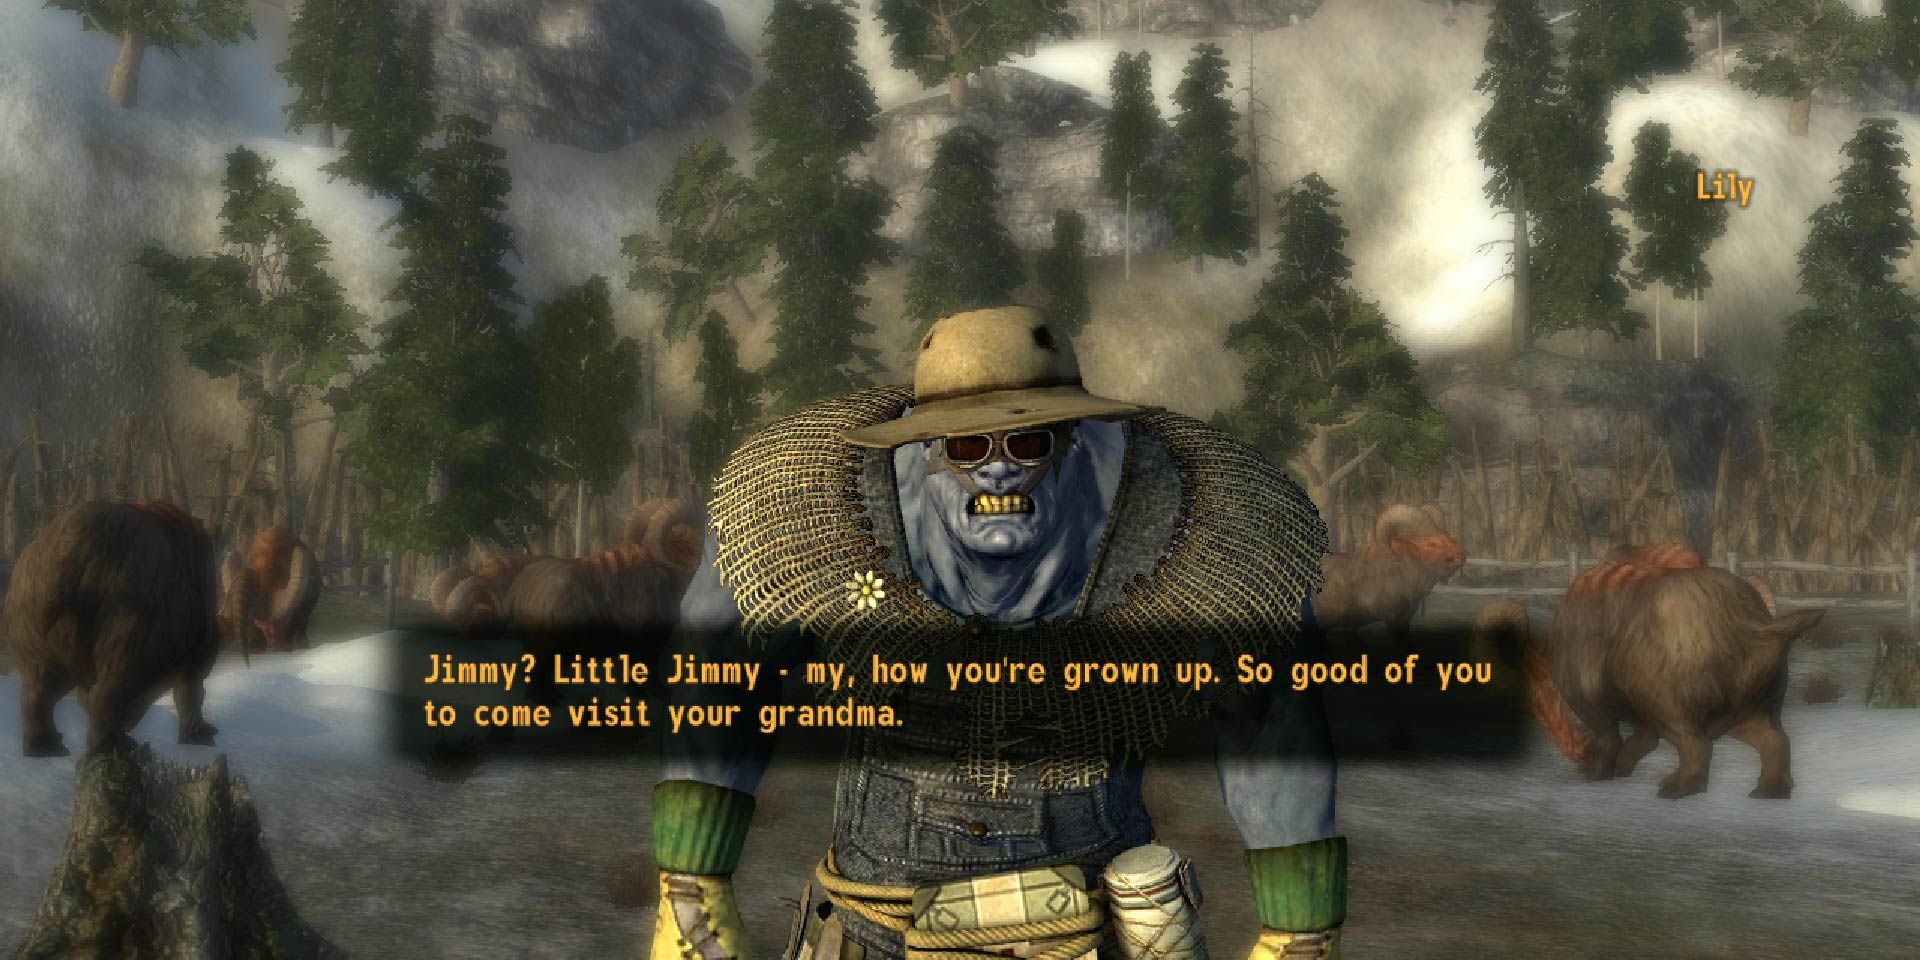 Lily in New Vegas saying "So good of you to visit your grandma."